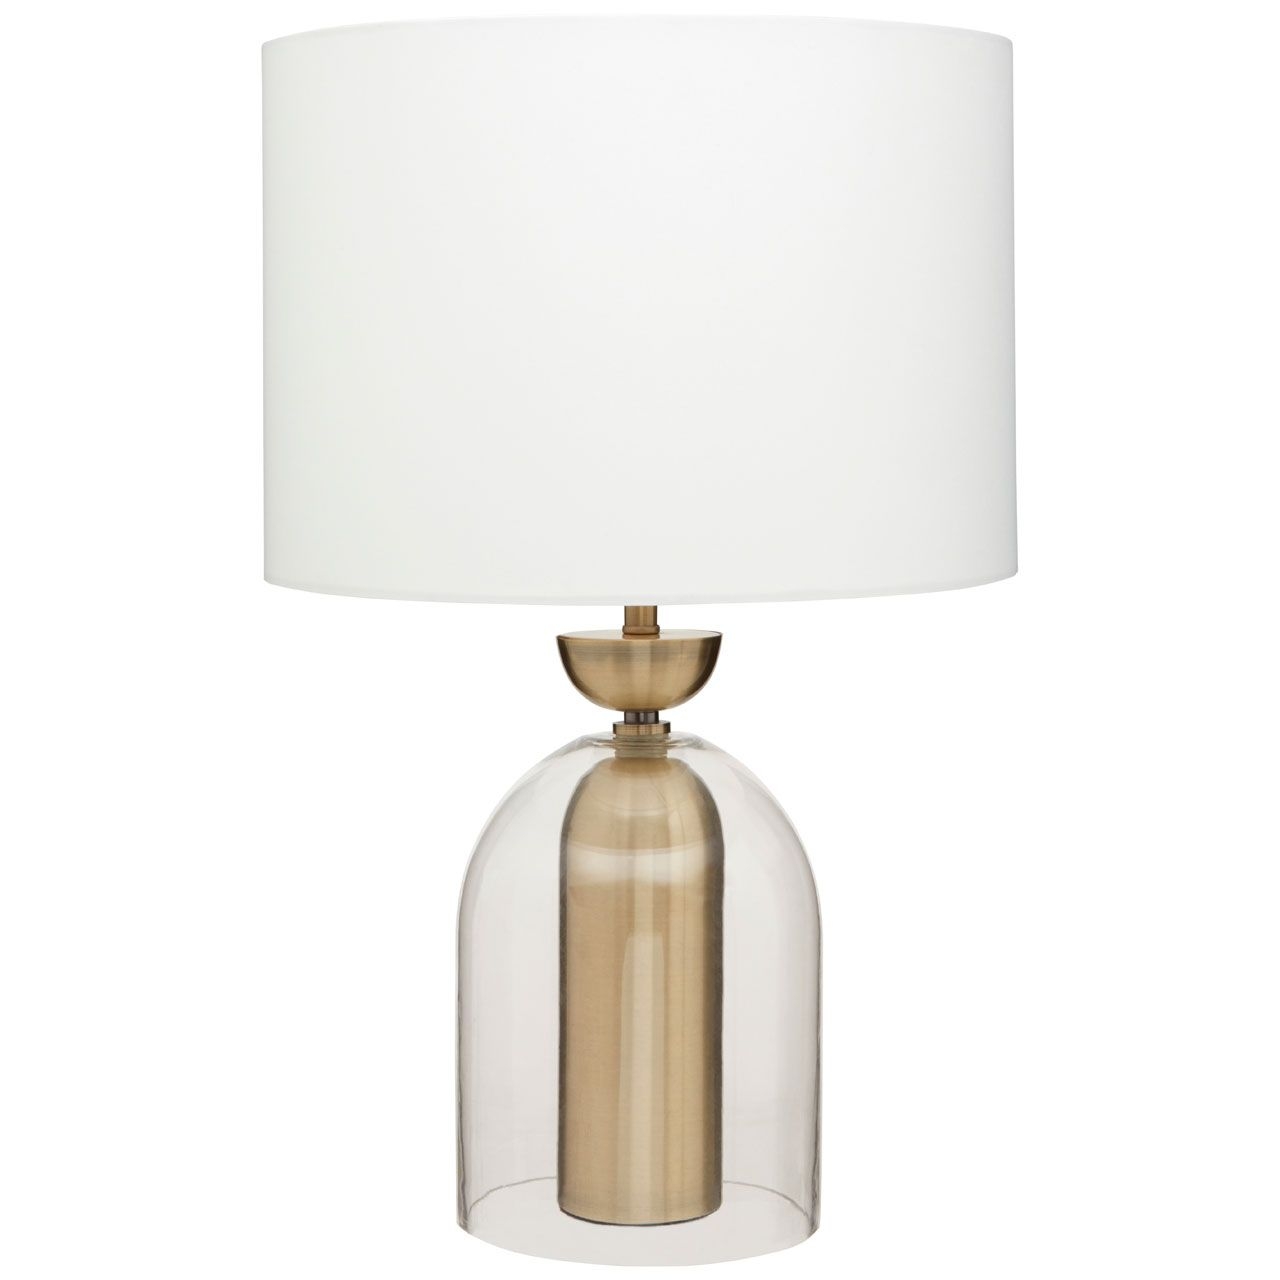 Cevro White Glass Shade Table Lamp With Brass Metal Base